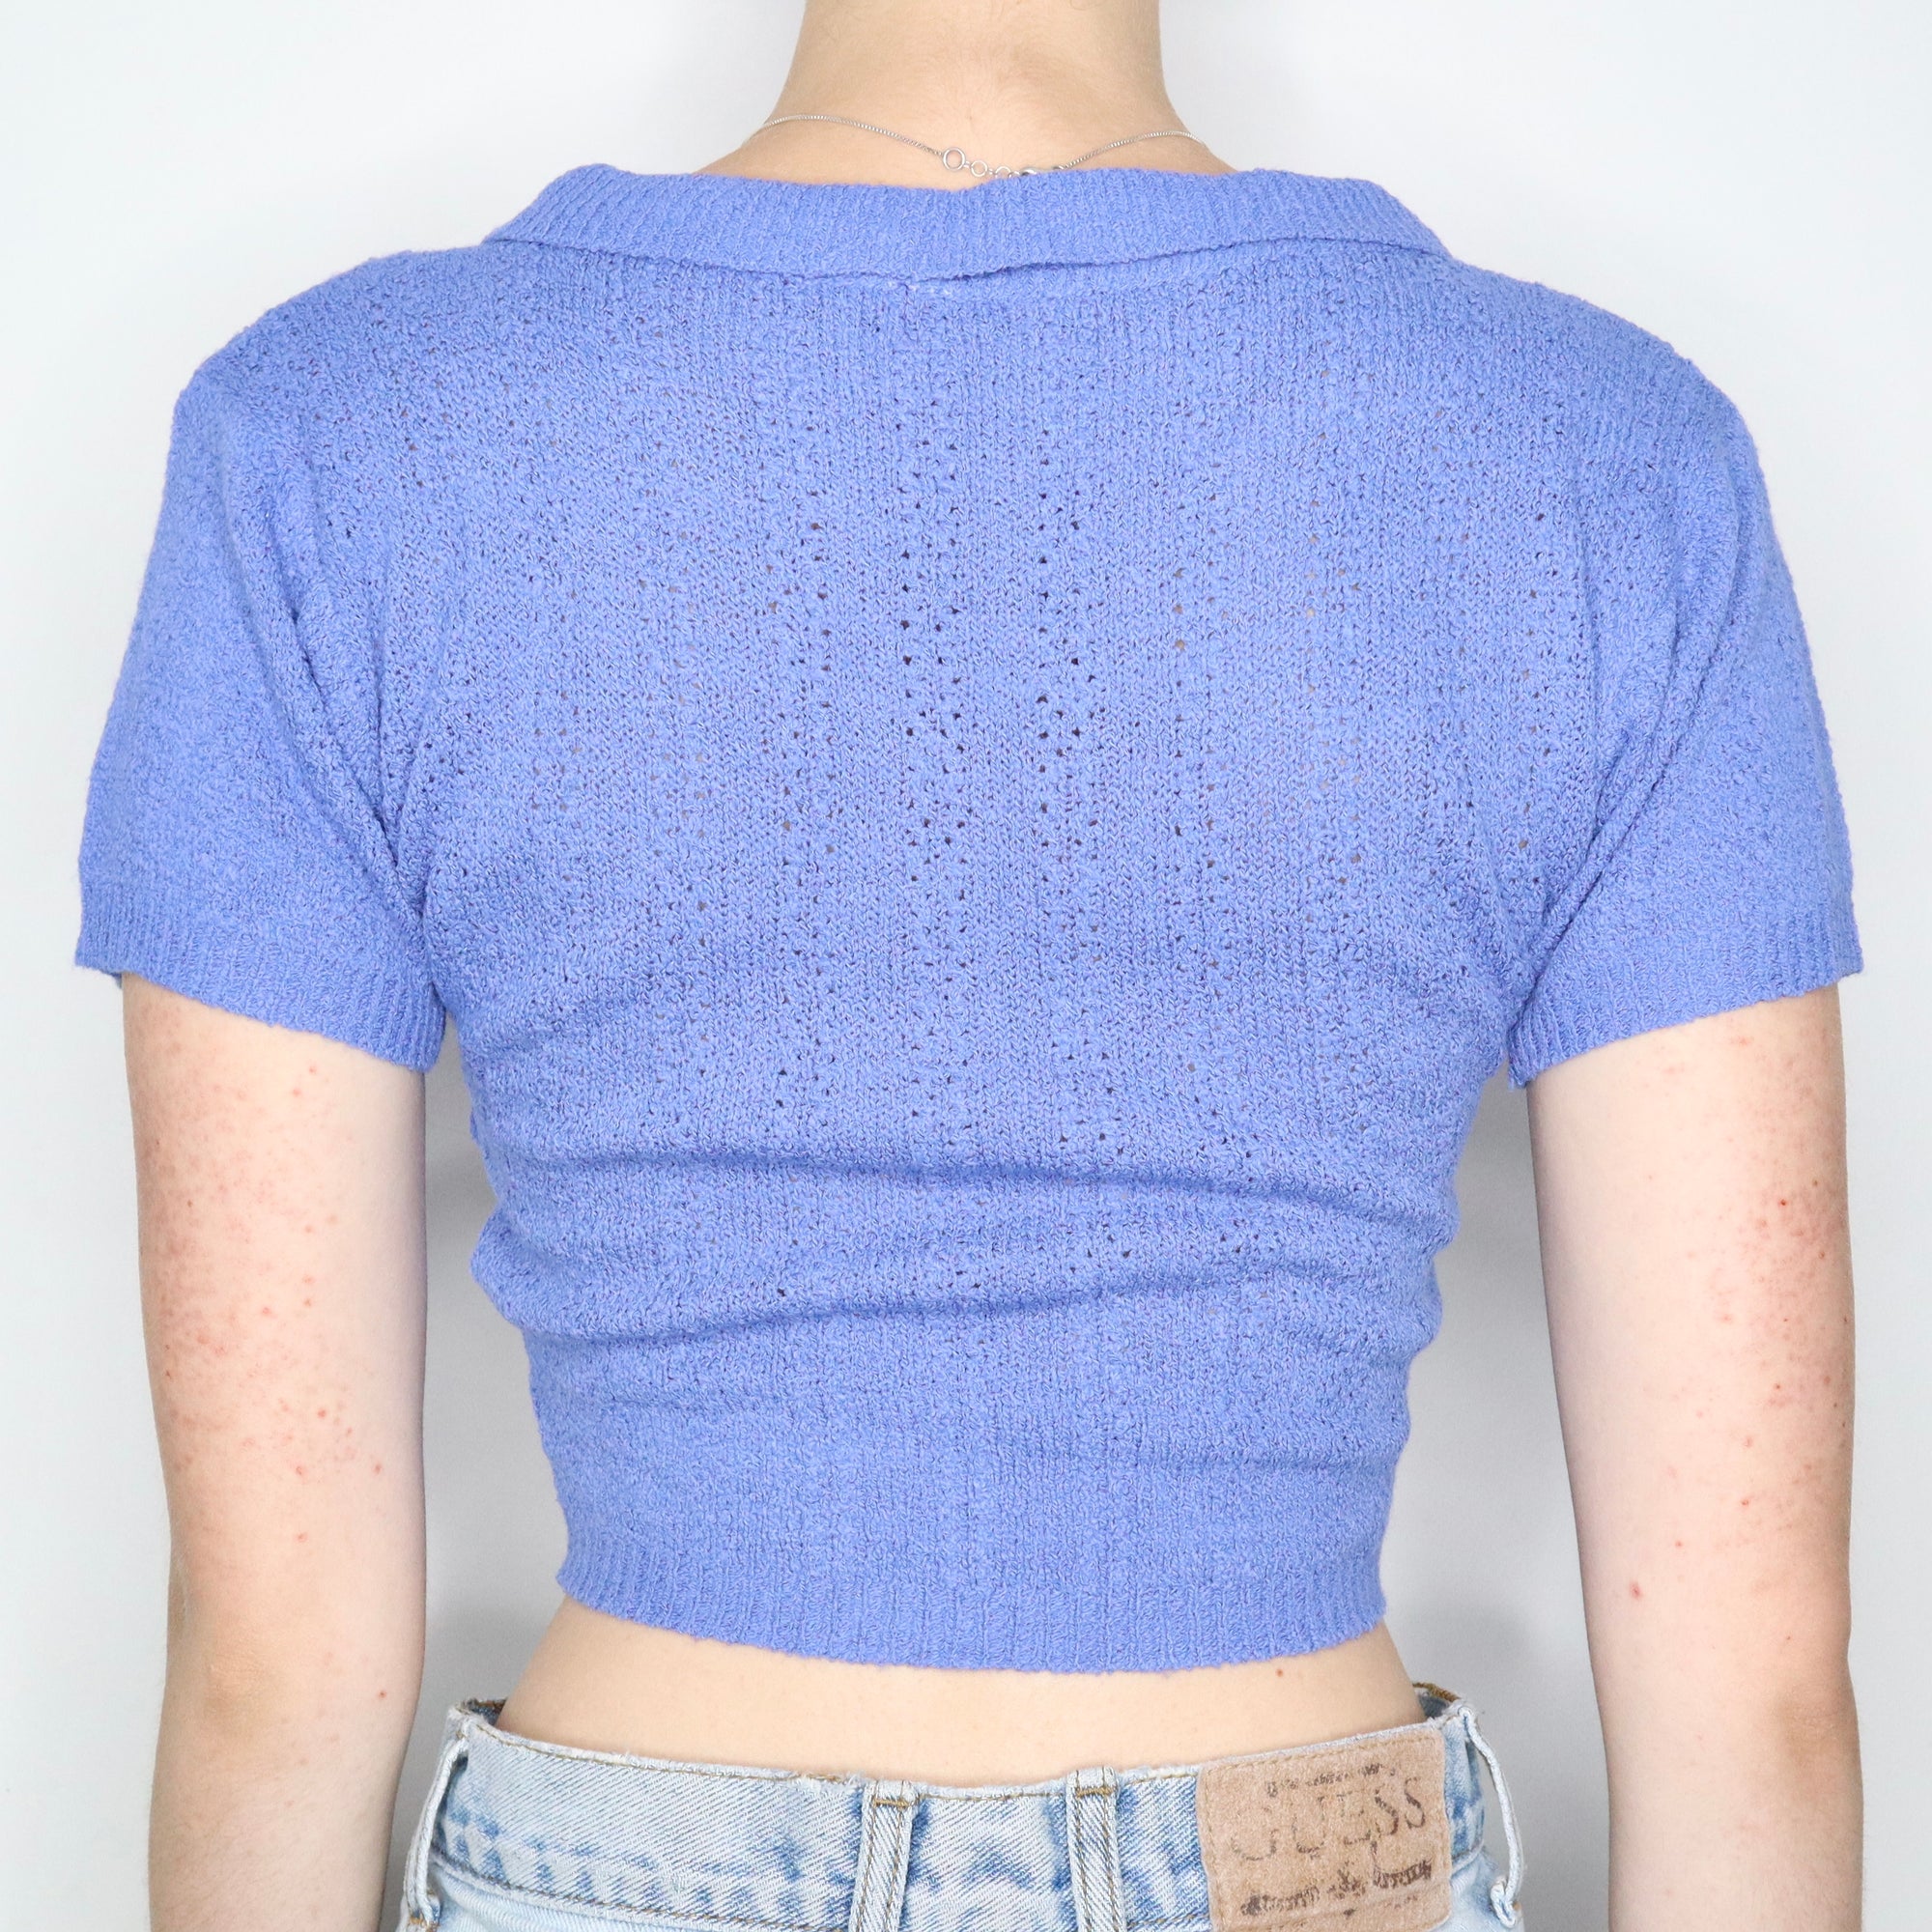 Vintage 1970s Cornflower Blue Cropped Collared Sweater